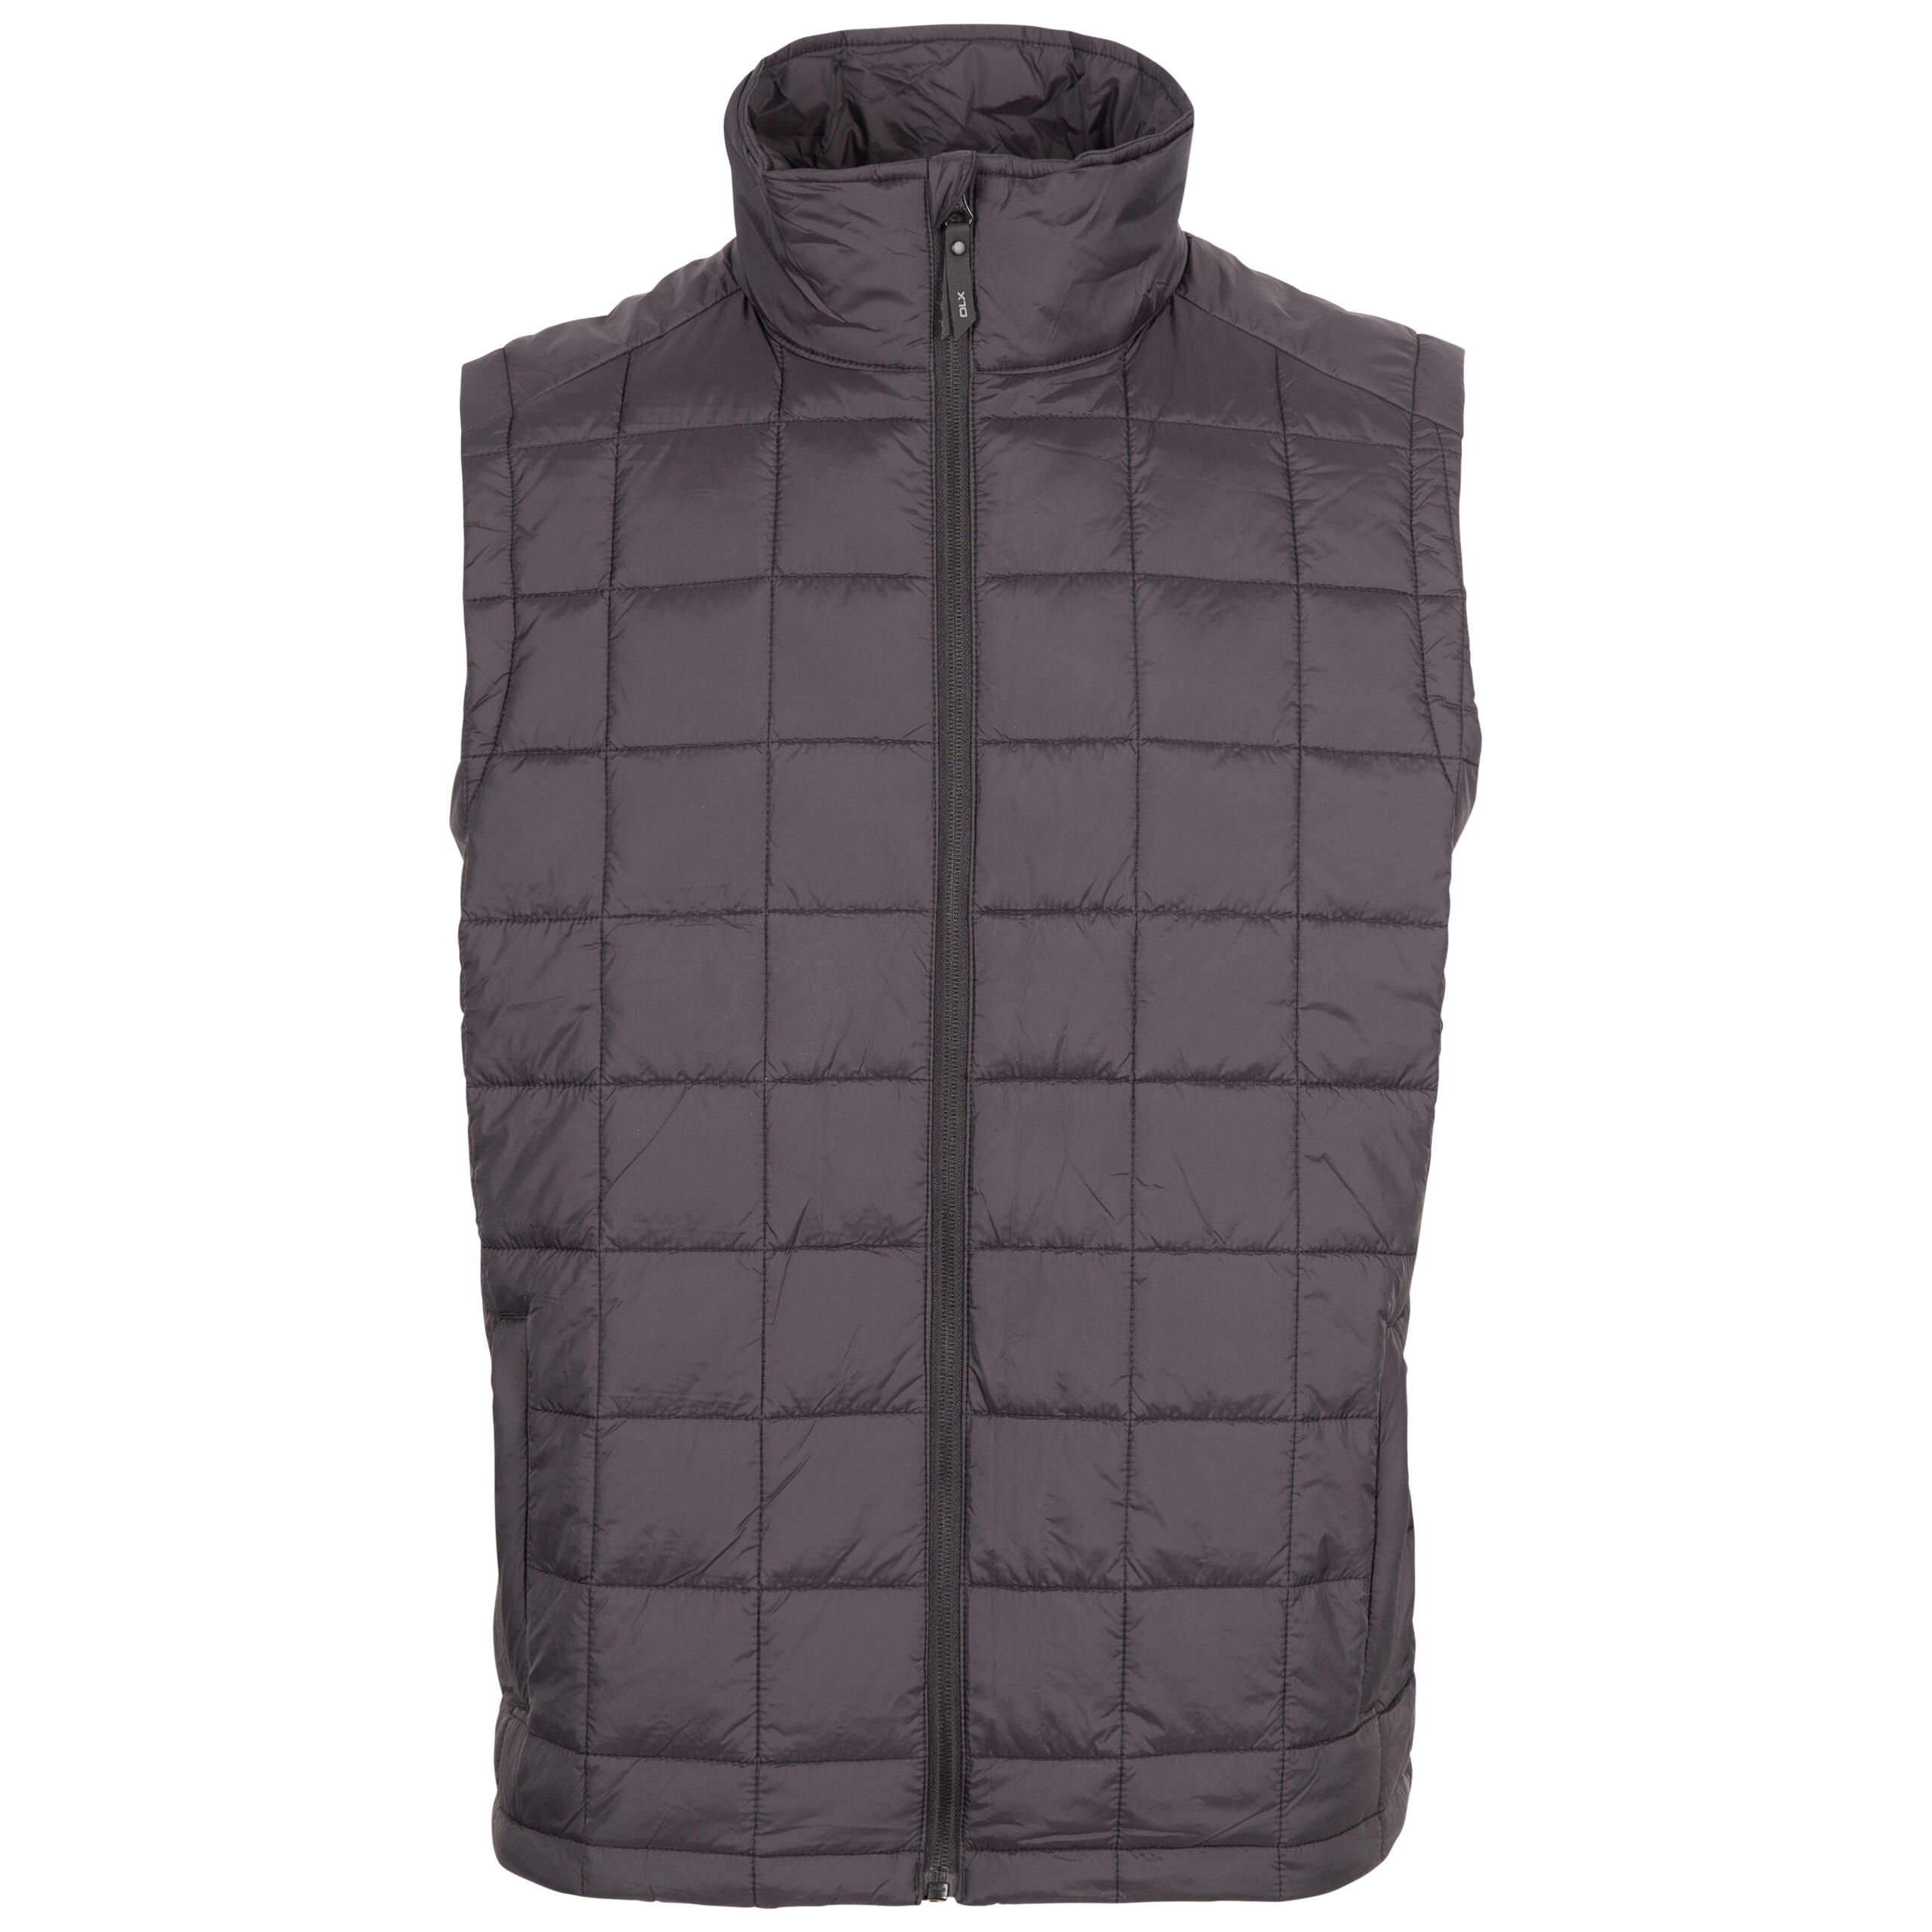 Mens Padded Gilet Bodywarmer with 2 Zip Pockets Enoless 1/2